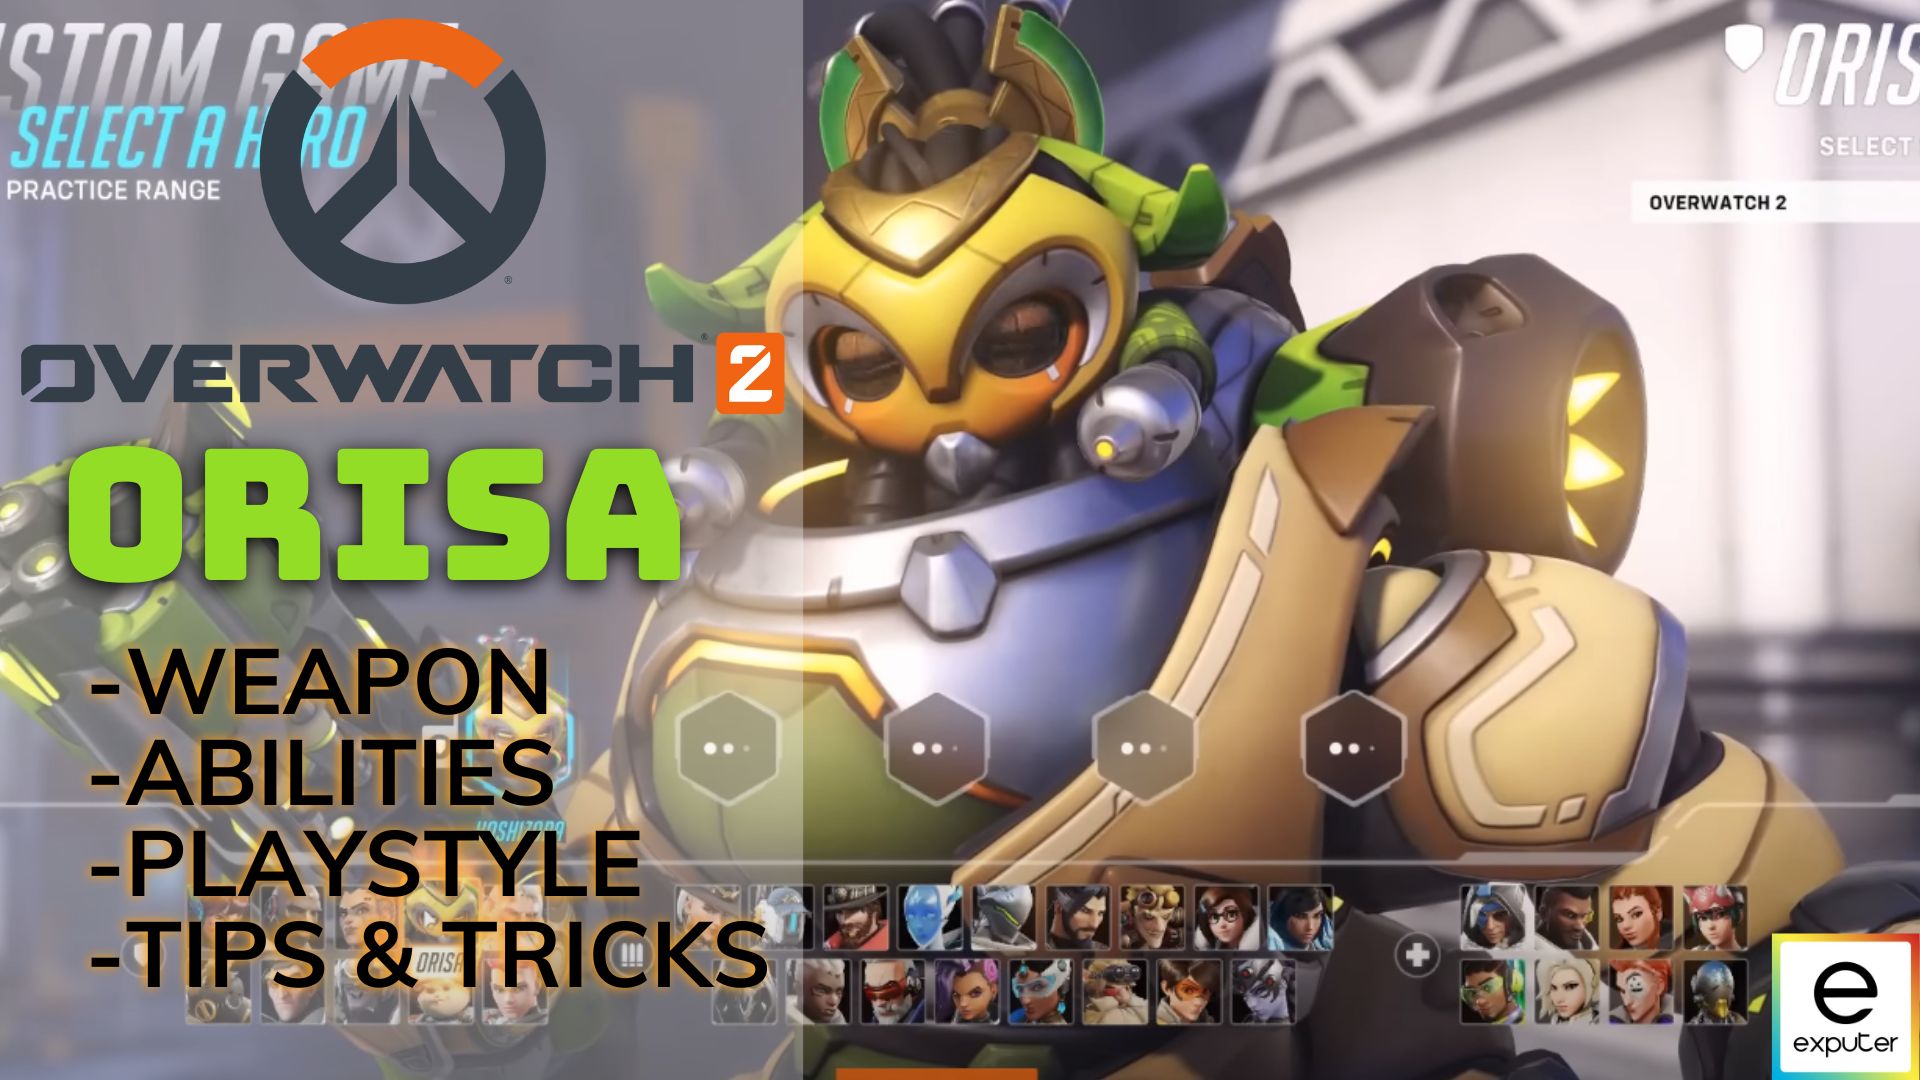 How to play as Orisa in Overwatch 2